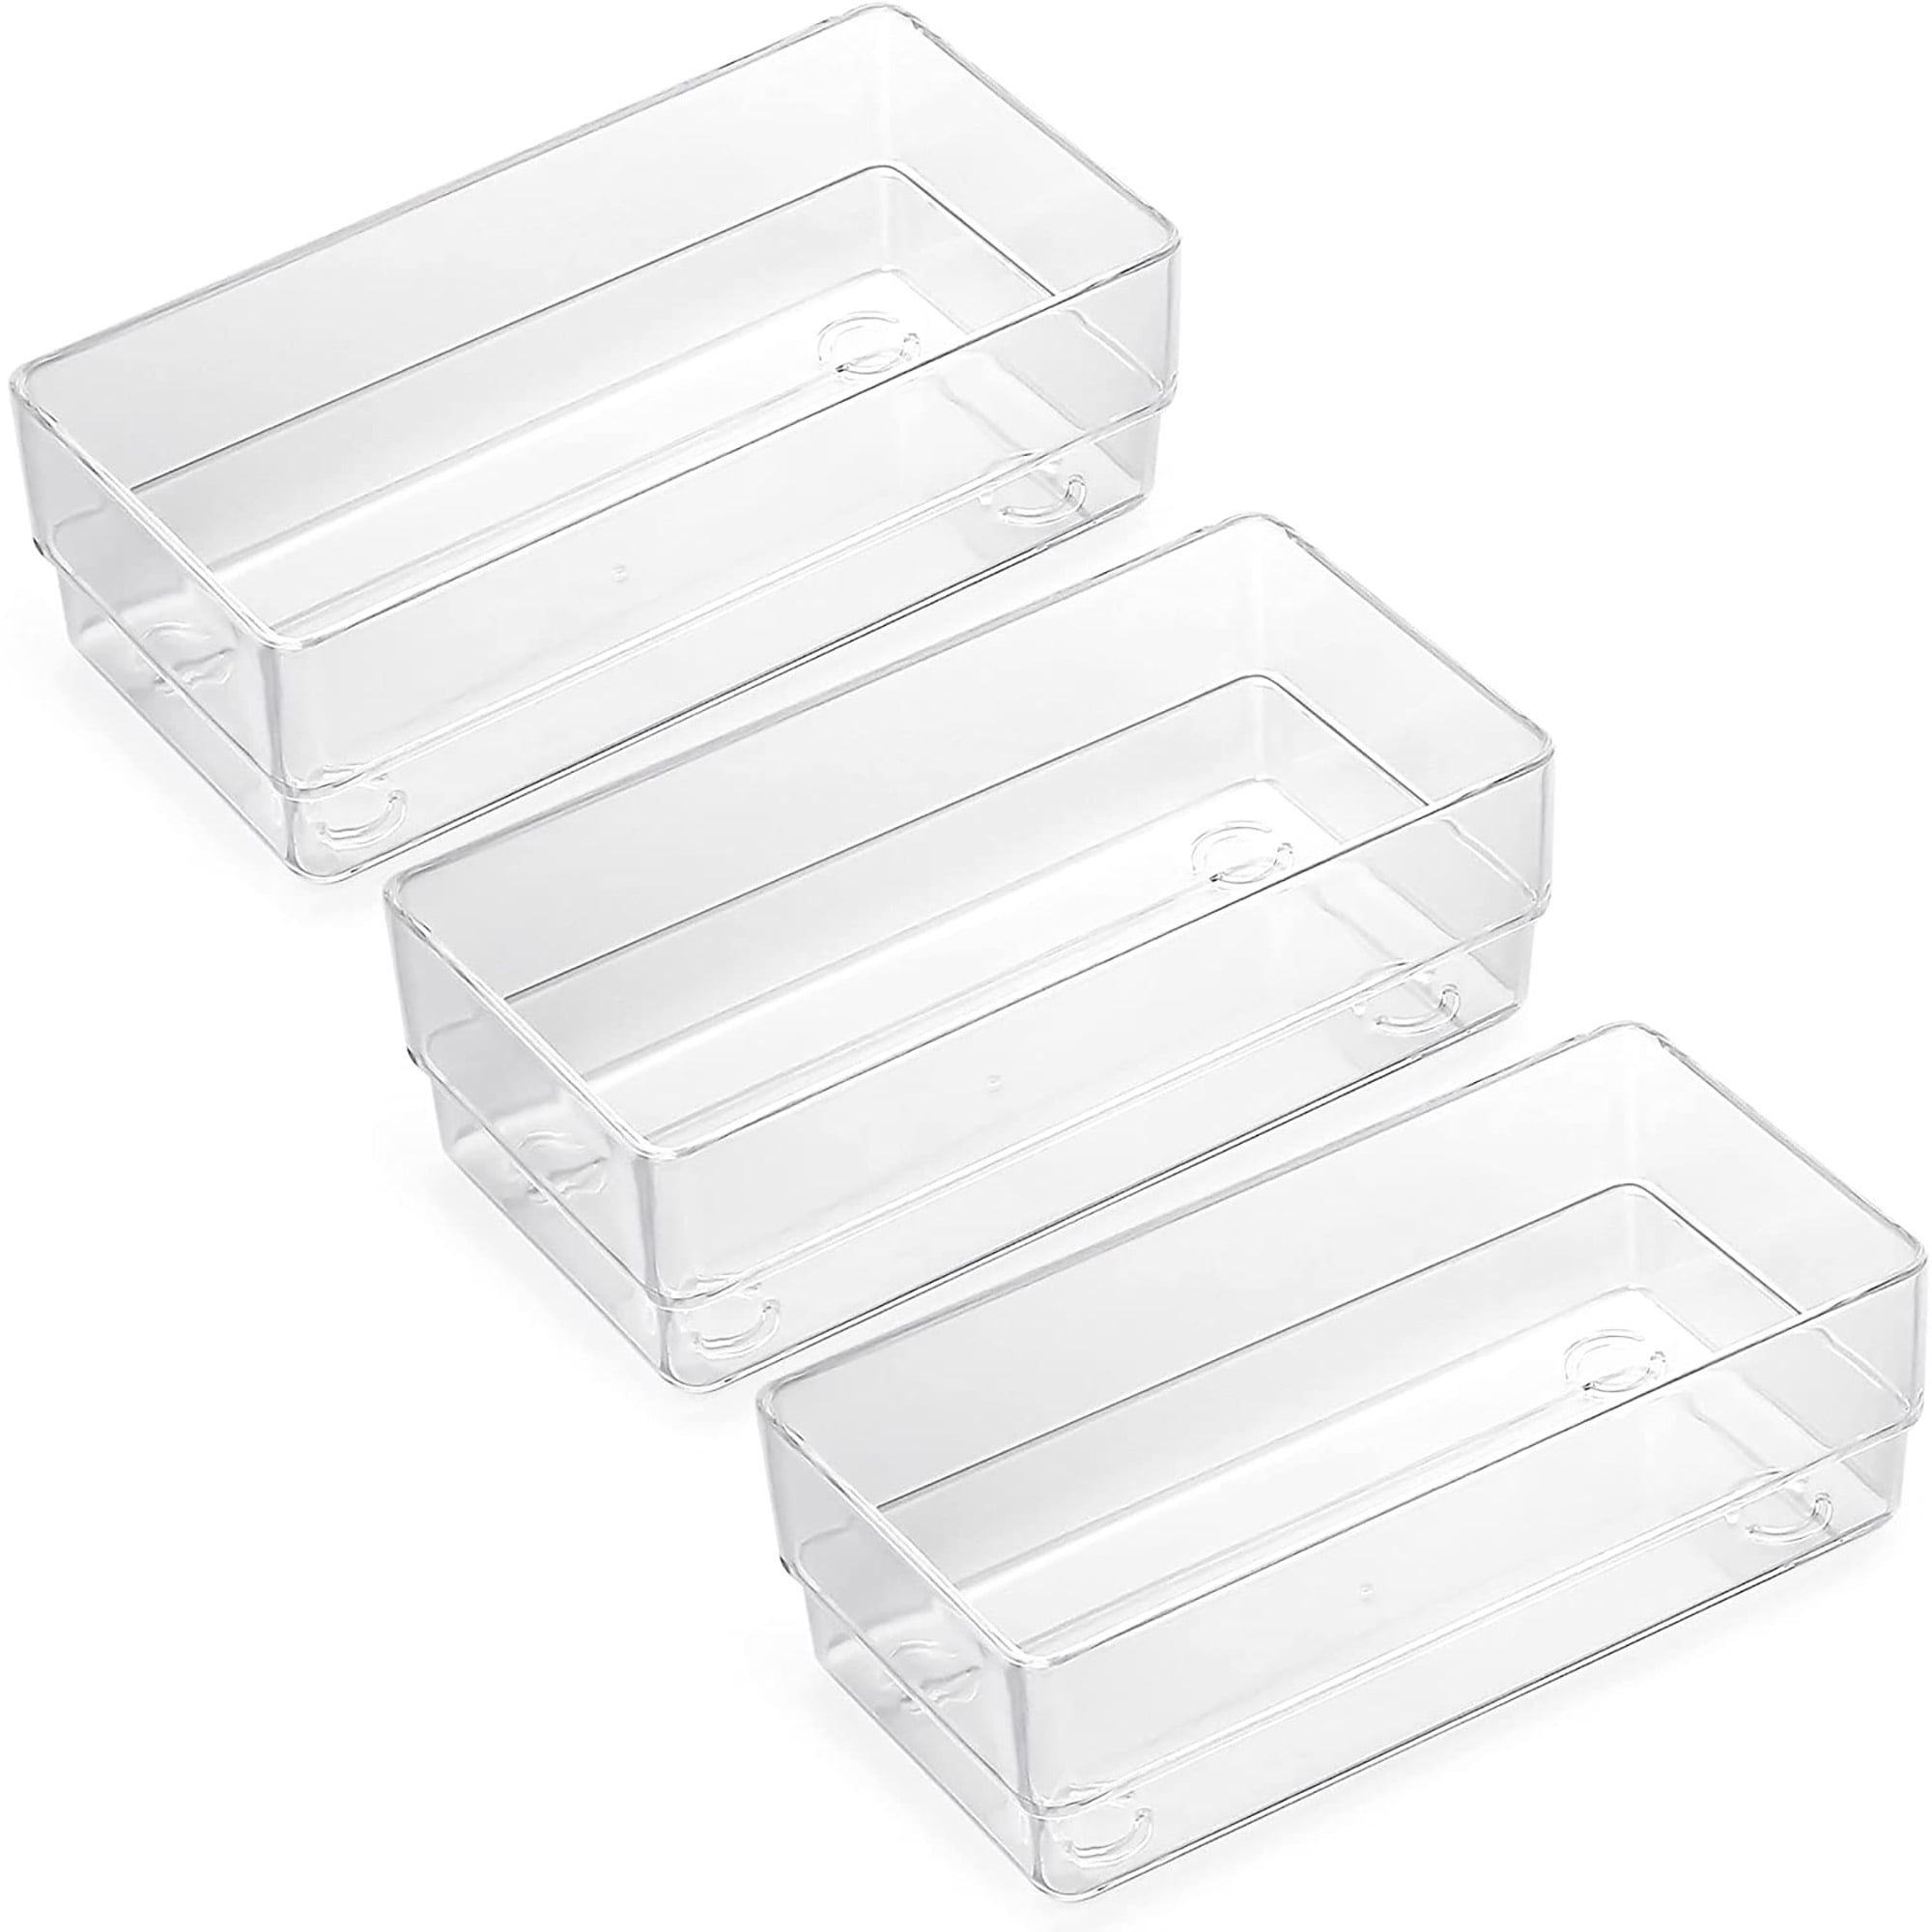 Lotfancy Clear Plastic Drawer Organizer, 12x3x2 in, Set of 3 Drawer Storage Containers, Size: 3pcs 12x3x2 in